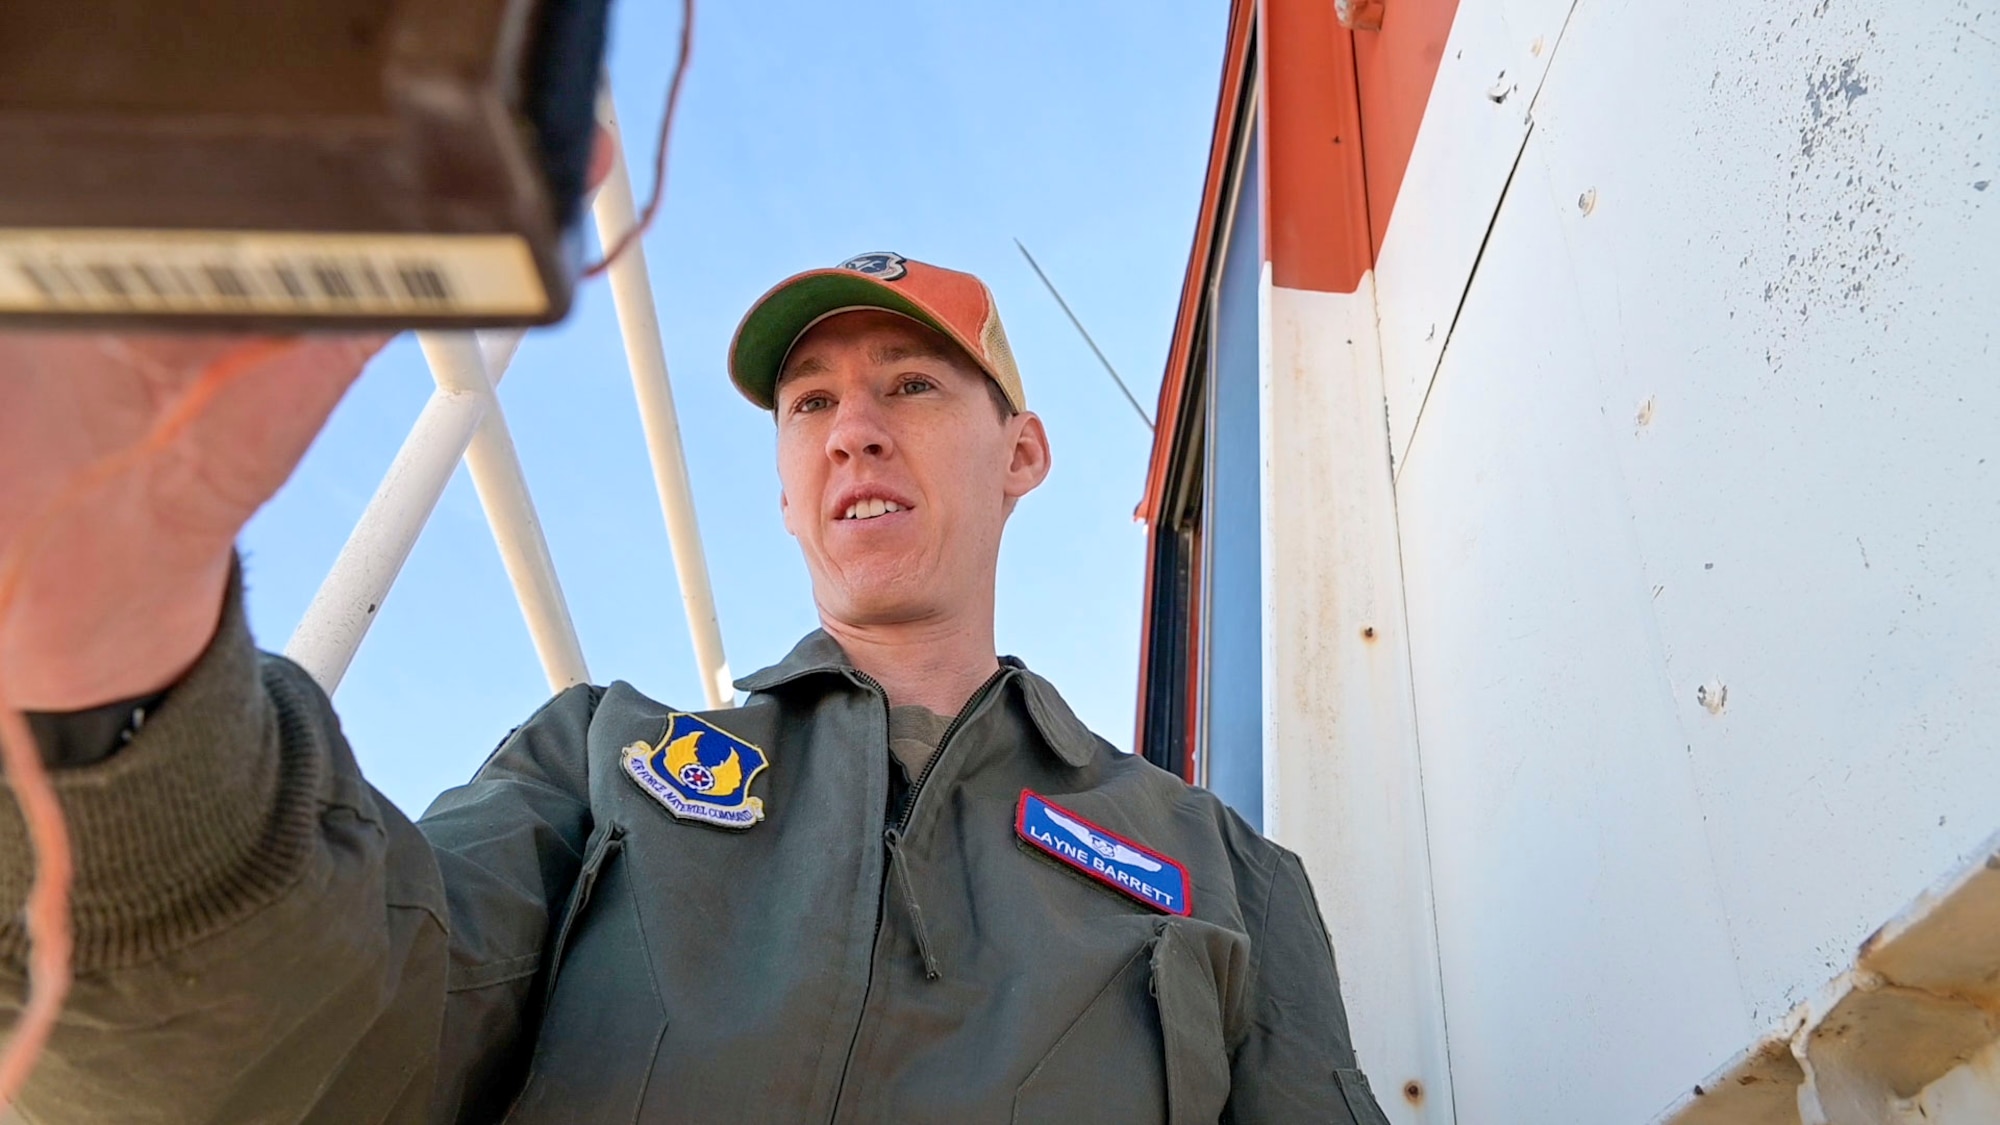 Capt. Layne Barrett, Student, USAF Test Pilot School records temperature data during the Tower Fly-By event. The Tower Fly-By curriculum event is used at USAF TPS to expose students to multiple learning objectives such as safety planning, monitoring of safety critical parameters, use of radio communication, collection of flight and ground data, and the analysis and reporting of flight test results.